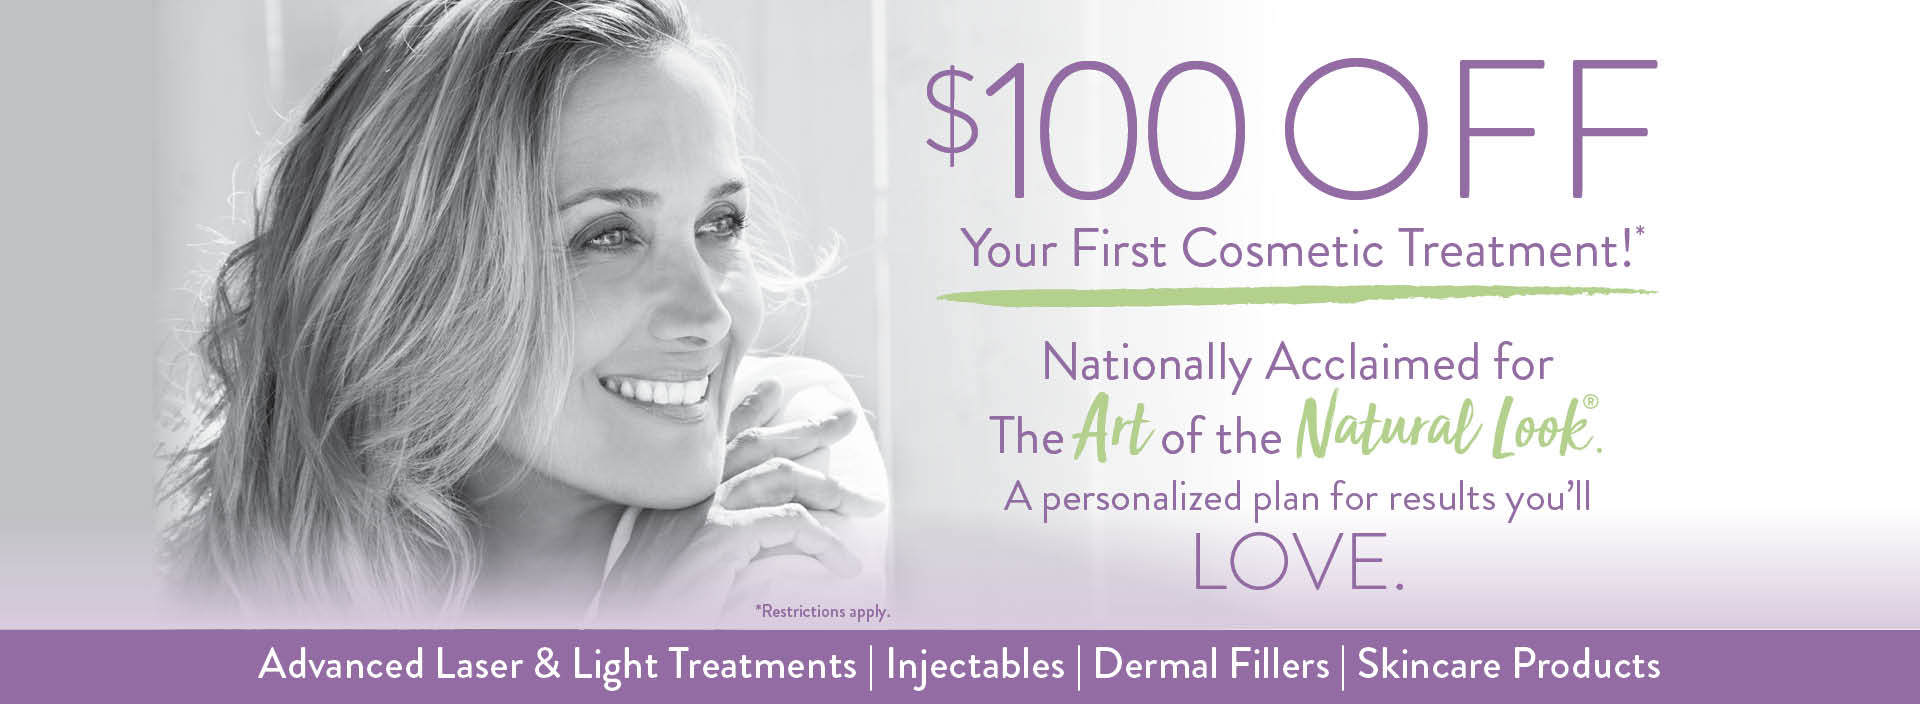 $100 off your first cosmetic treatment at SkinSmart Dermatology, your Sarasota dermatologist